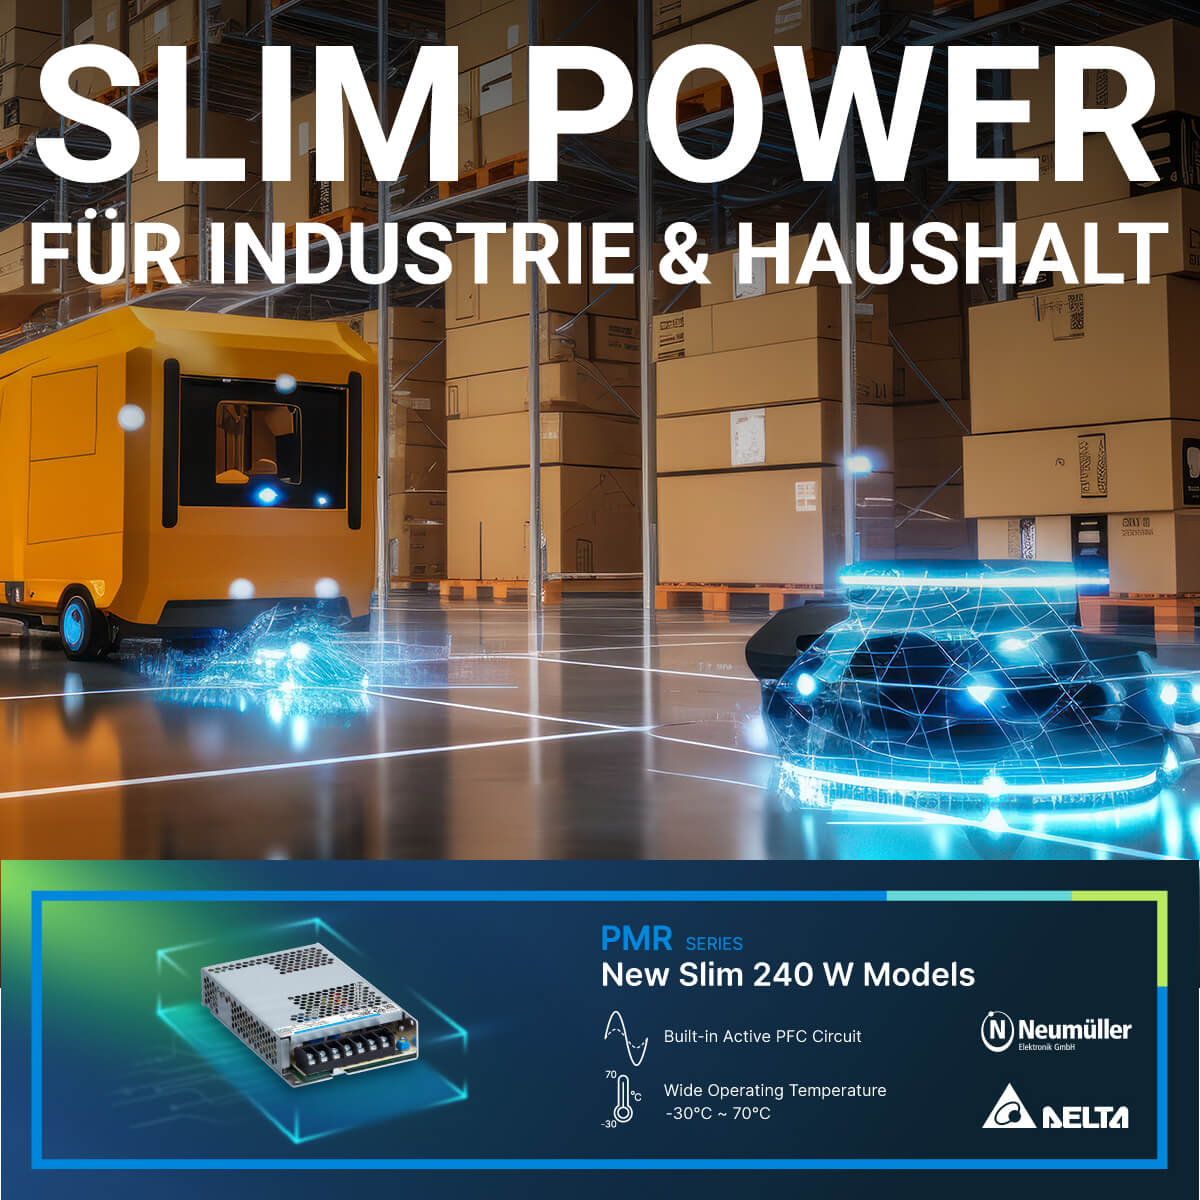 Slim power for industry and household